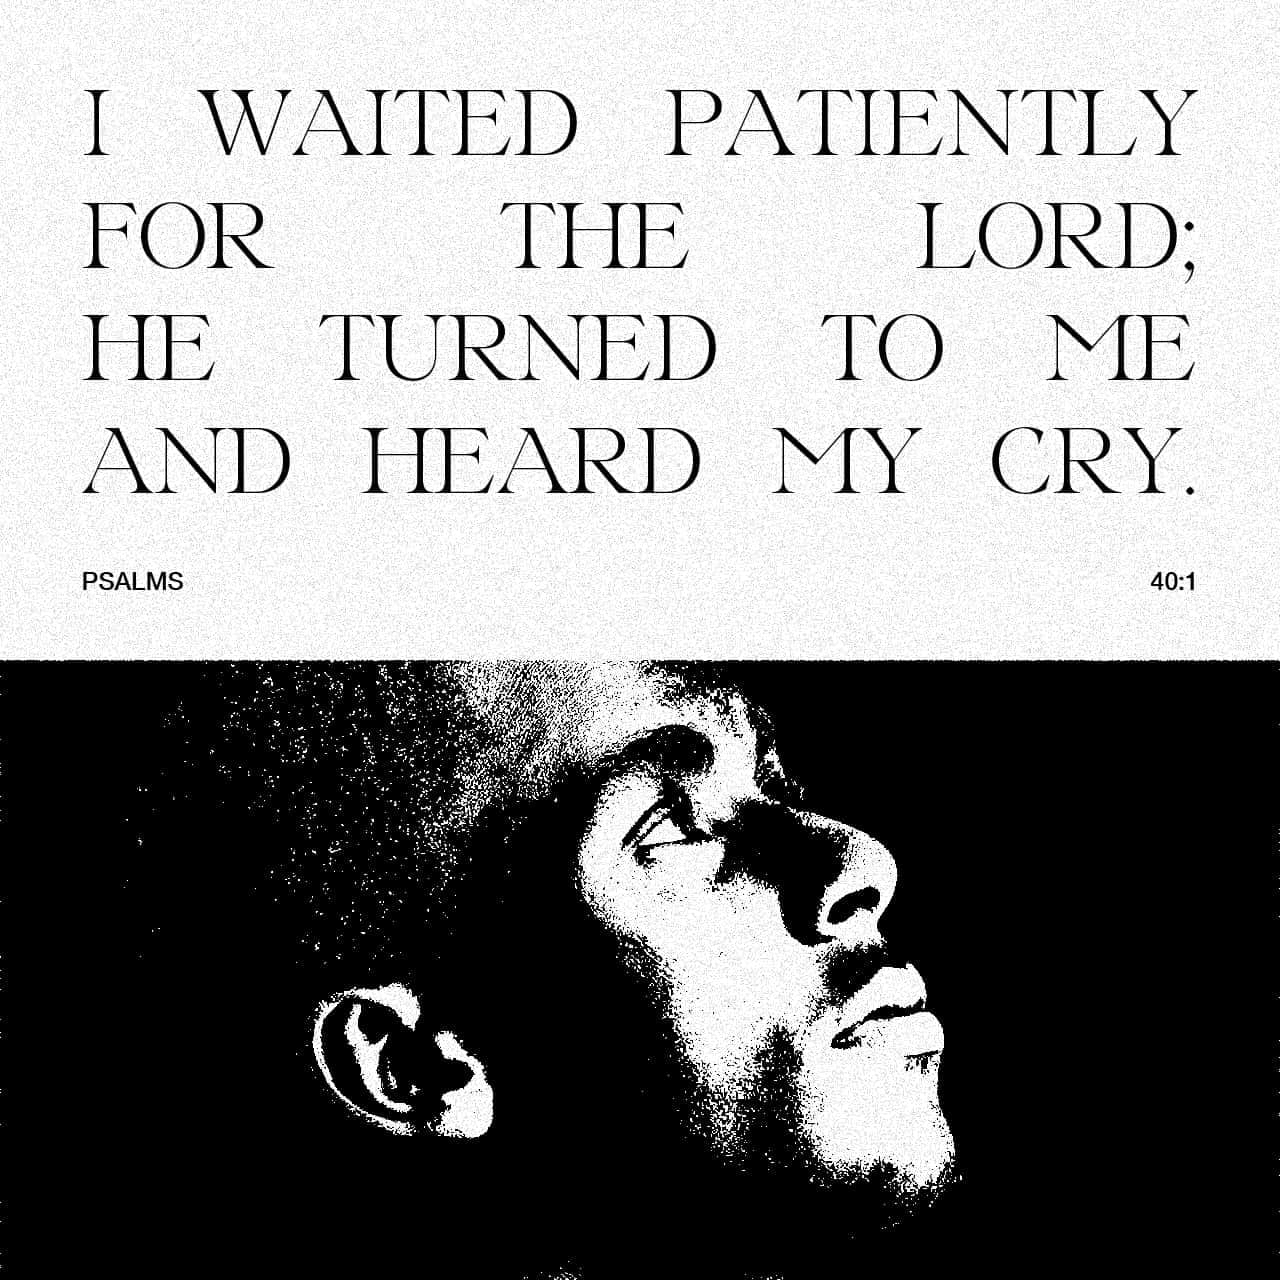 Psalms 40:1-2 I waited patiently for the LORD; he turned to me and heard my cry. He lifted me out of the slimy pit, out of the mud and mire; he set my feet on a rock and gave me a firm place to stand. | New International Version (NIV) | Download The Bible App Now